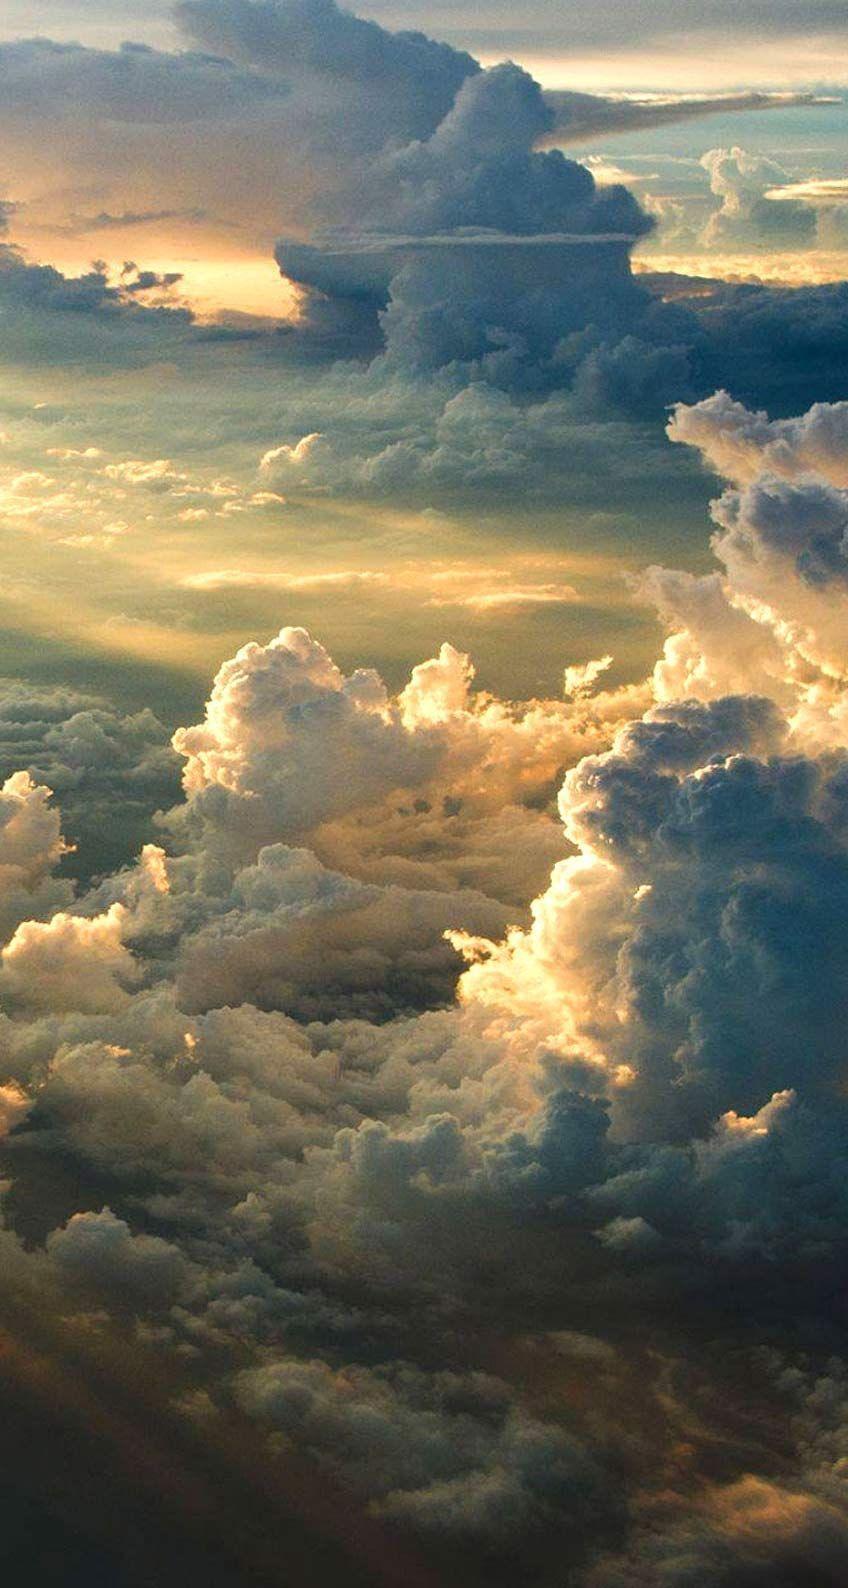 Nature Wallpaper. Sunset Clouds Wallpaper /Sunset_Clouds_Wallpaper_freecomputerdesktopwallpaper.. Clouds, Beautiful sky, Picture